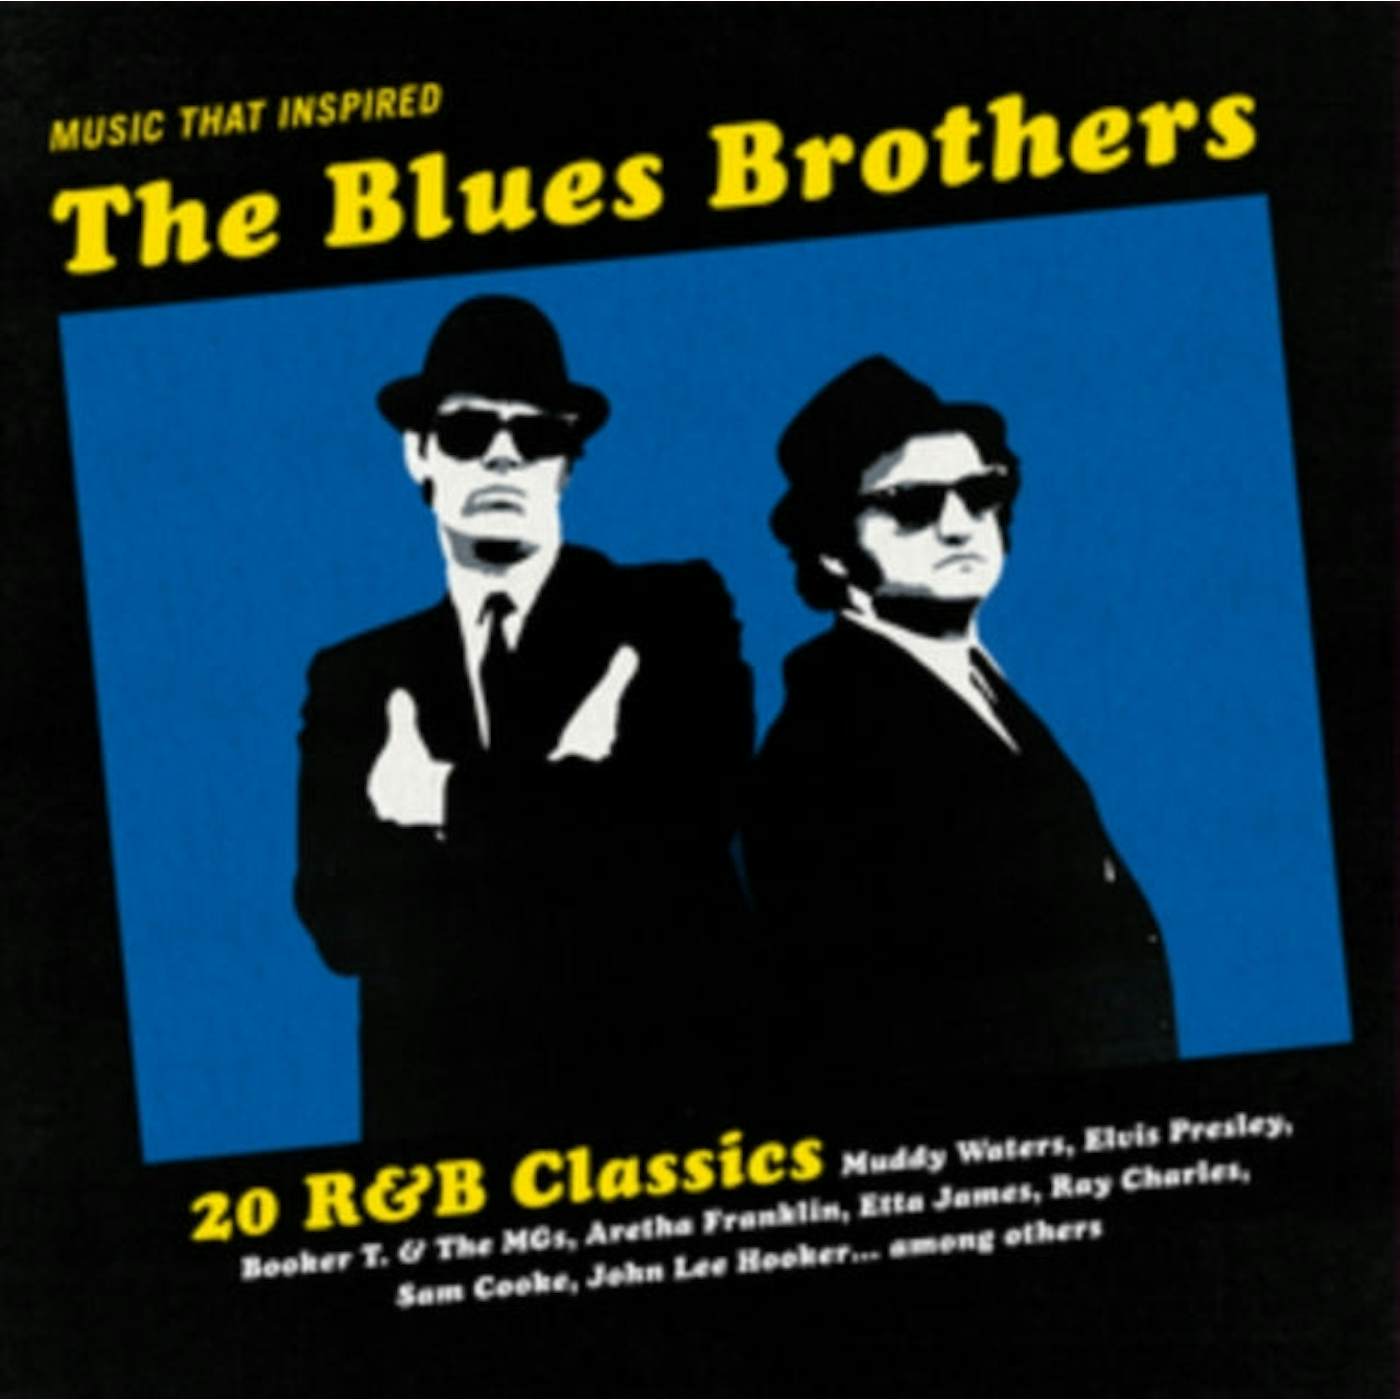 The Blues & Brothers LP Vinyl Record - Music That Inspired